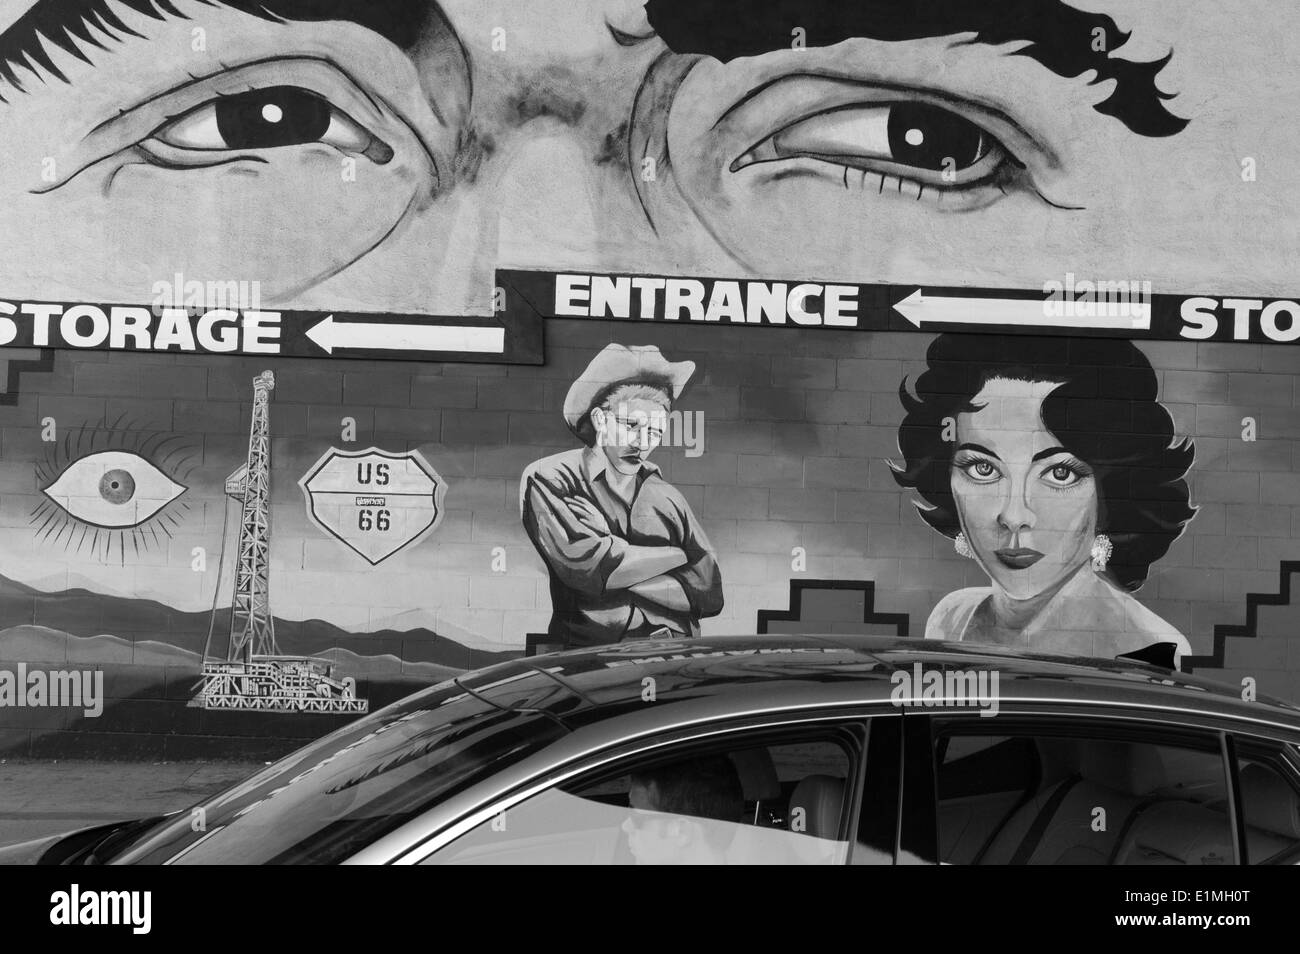 Hollywood mural of the movie Giant, with James Dean and Elizabeth Taylor. Stock Photo